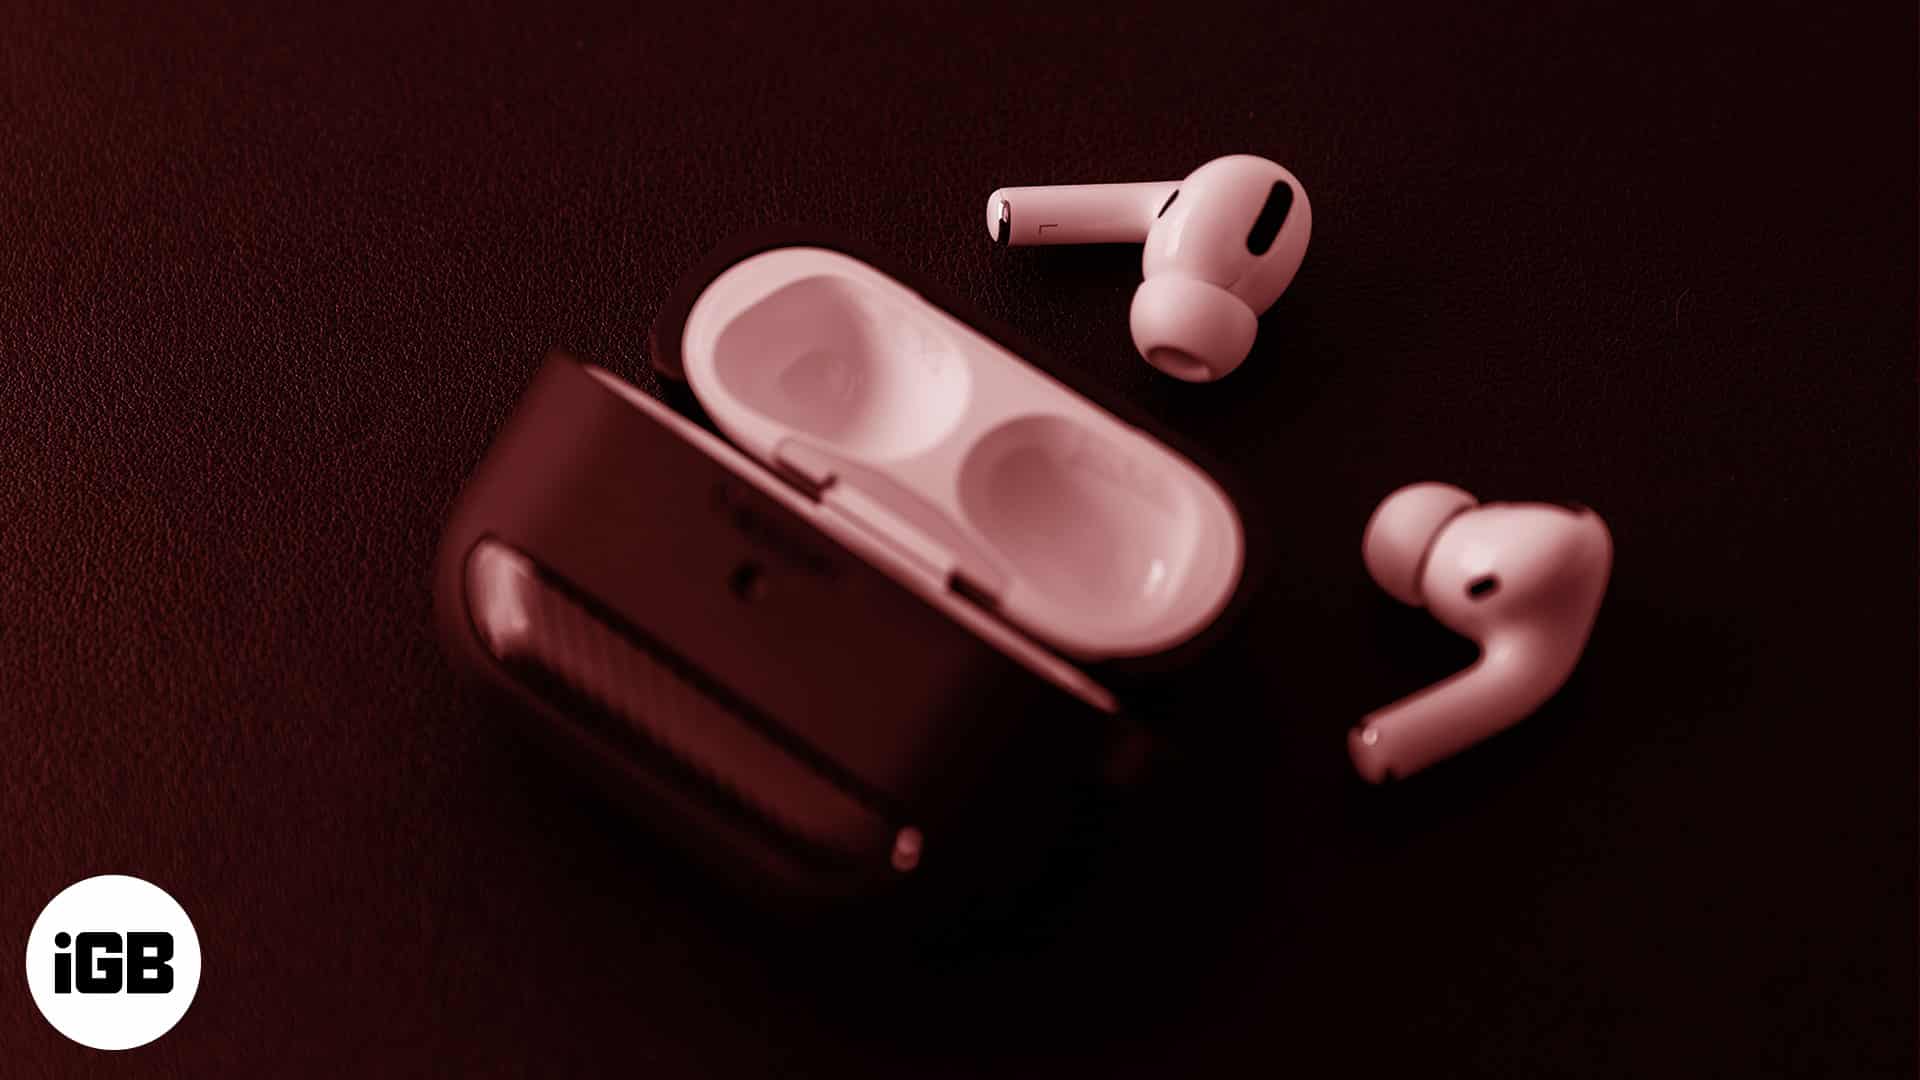 What to do with old and dying airpods